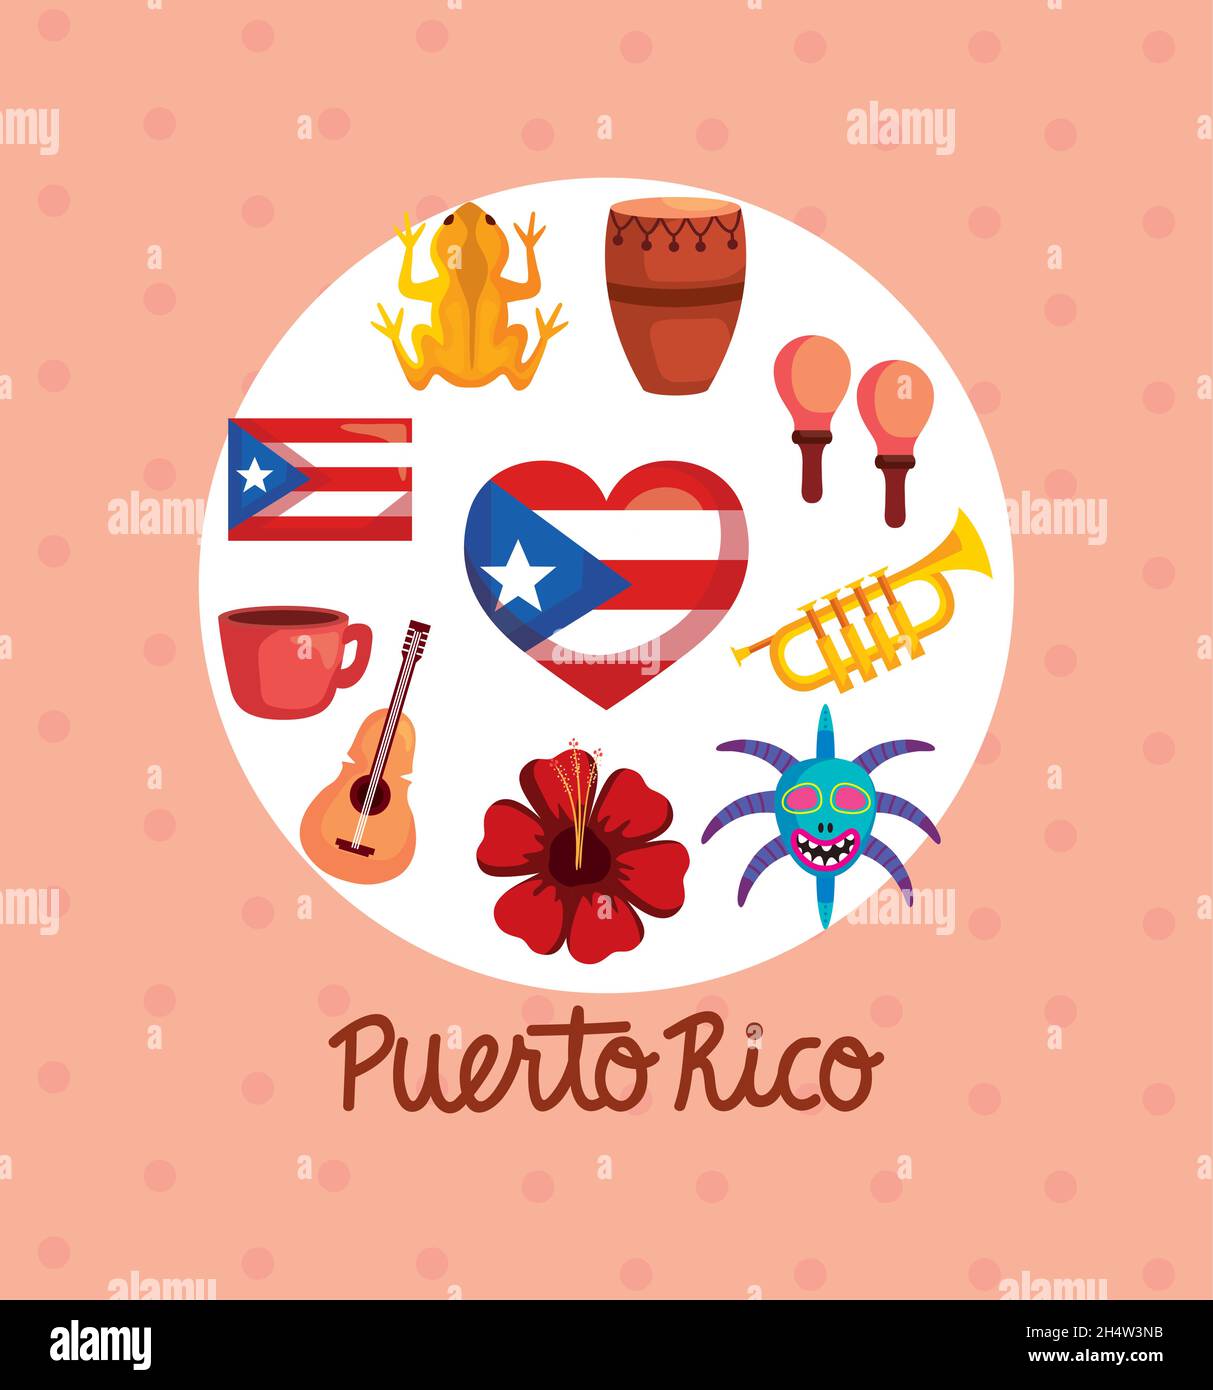 traditional icons of puerto rico Stock Vector